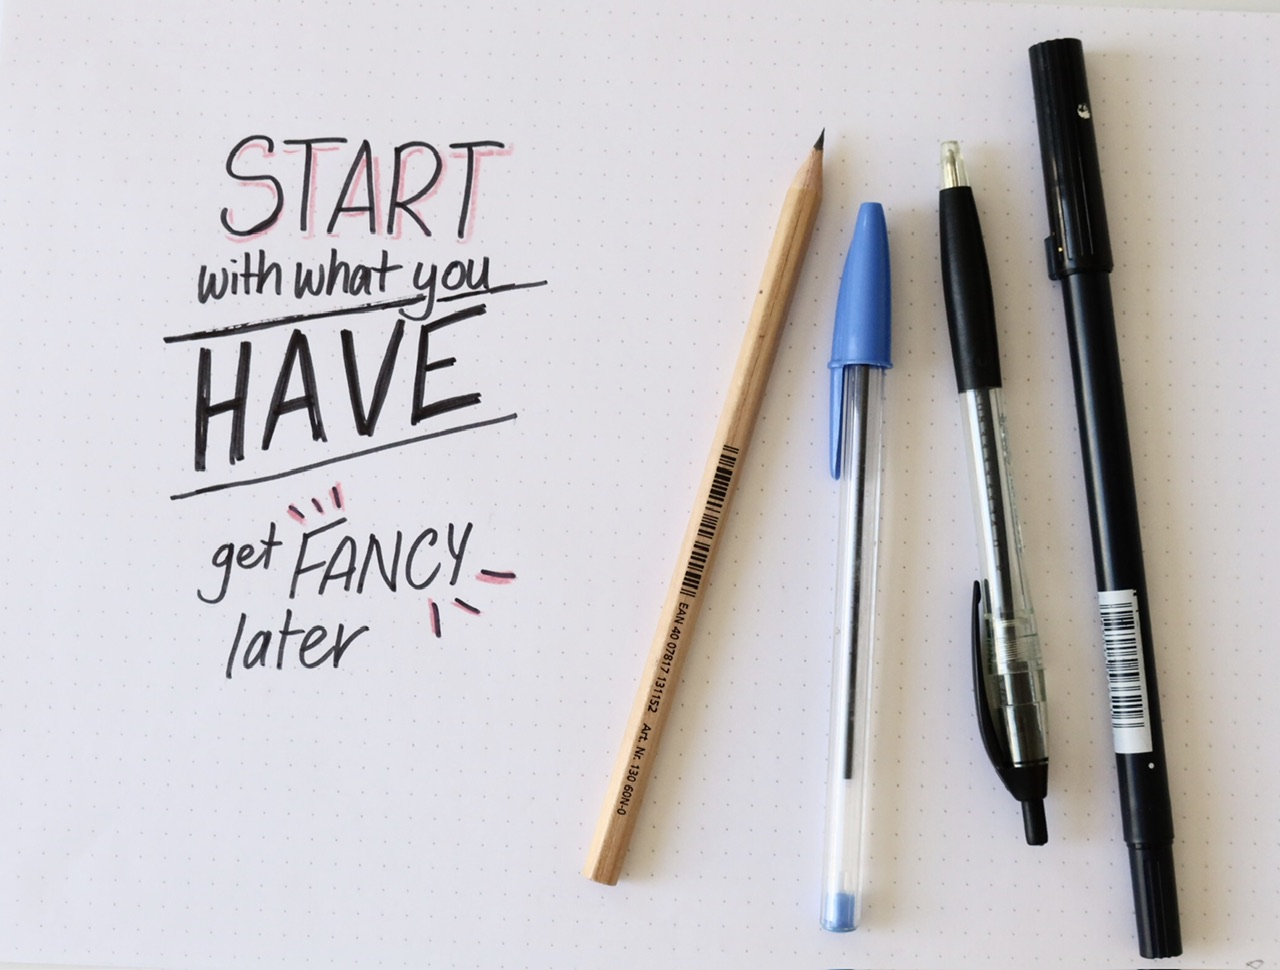 IMG_4502.jpeg|hand drawn lettering start with what you have, get fancy later with some pens photographed next to it